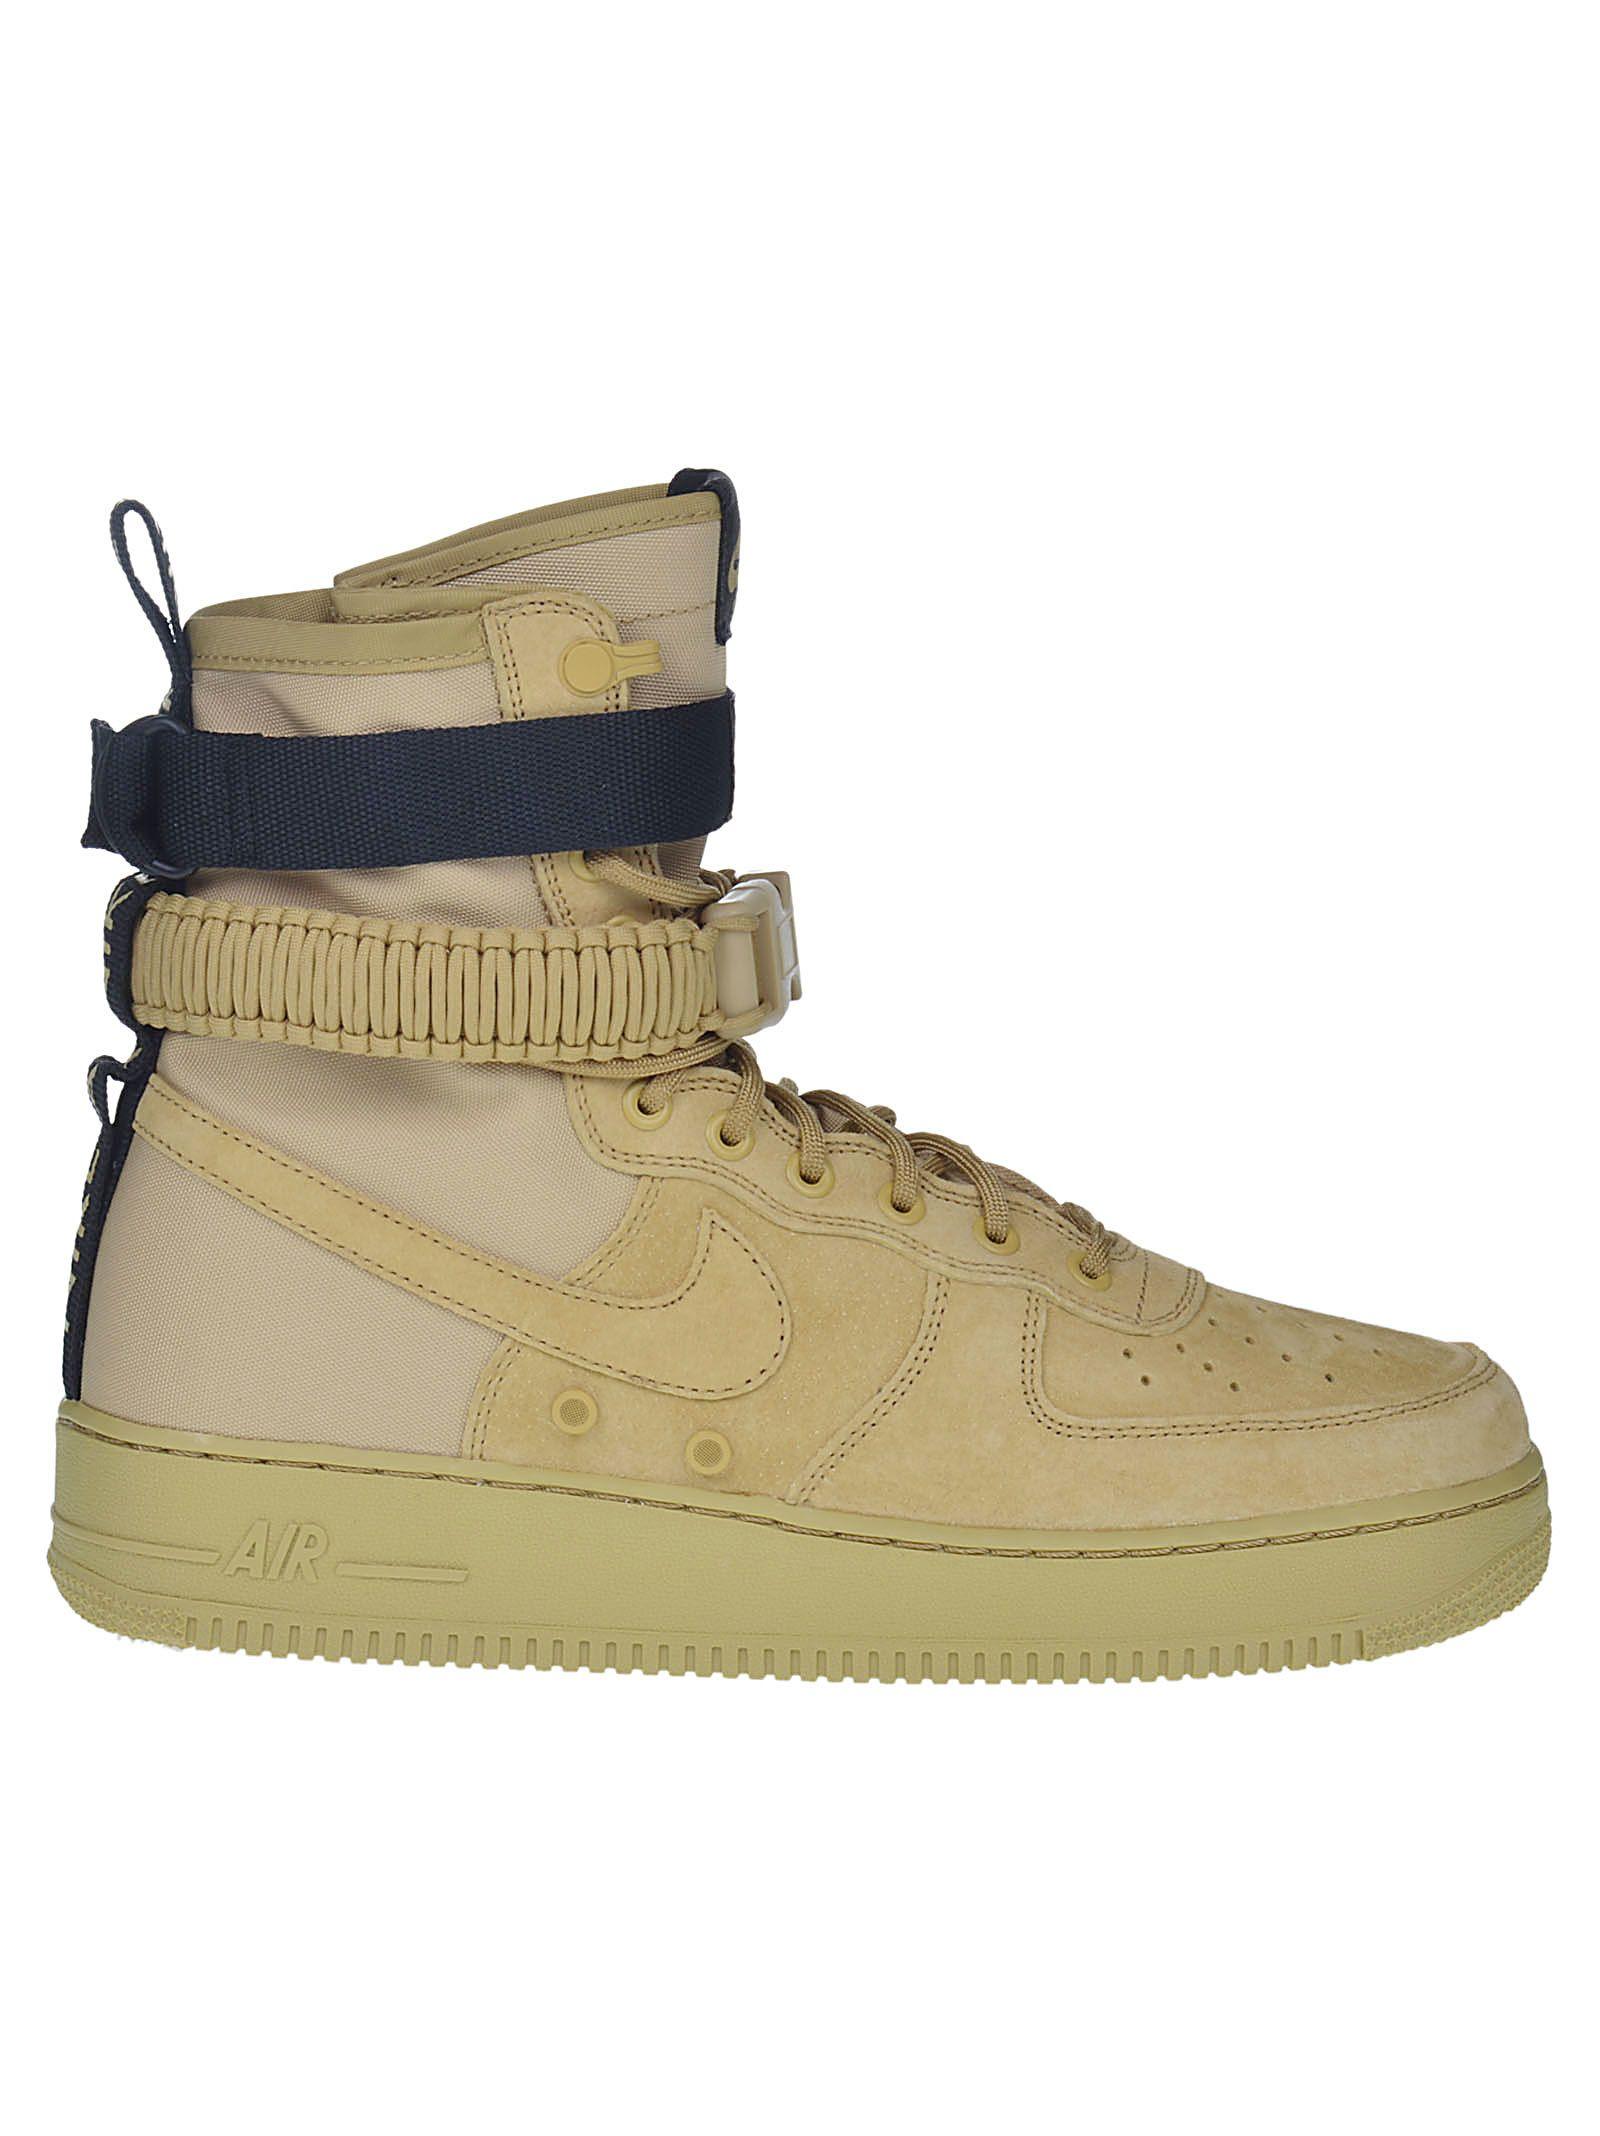 Nike Sf Air Force 1 High Top Sneakers In Yellow | ModeSens